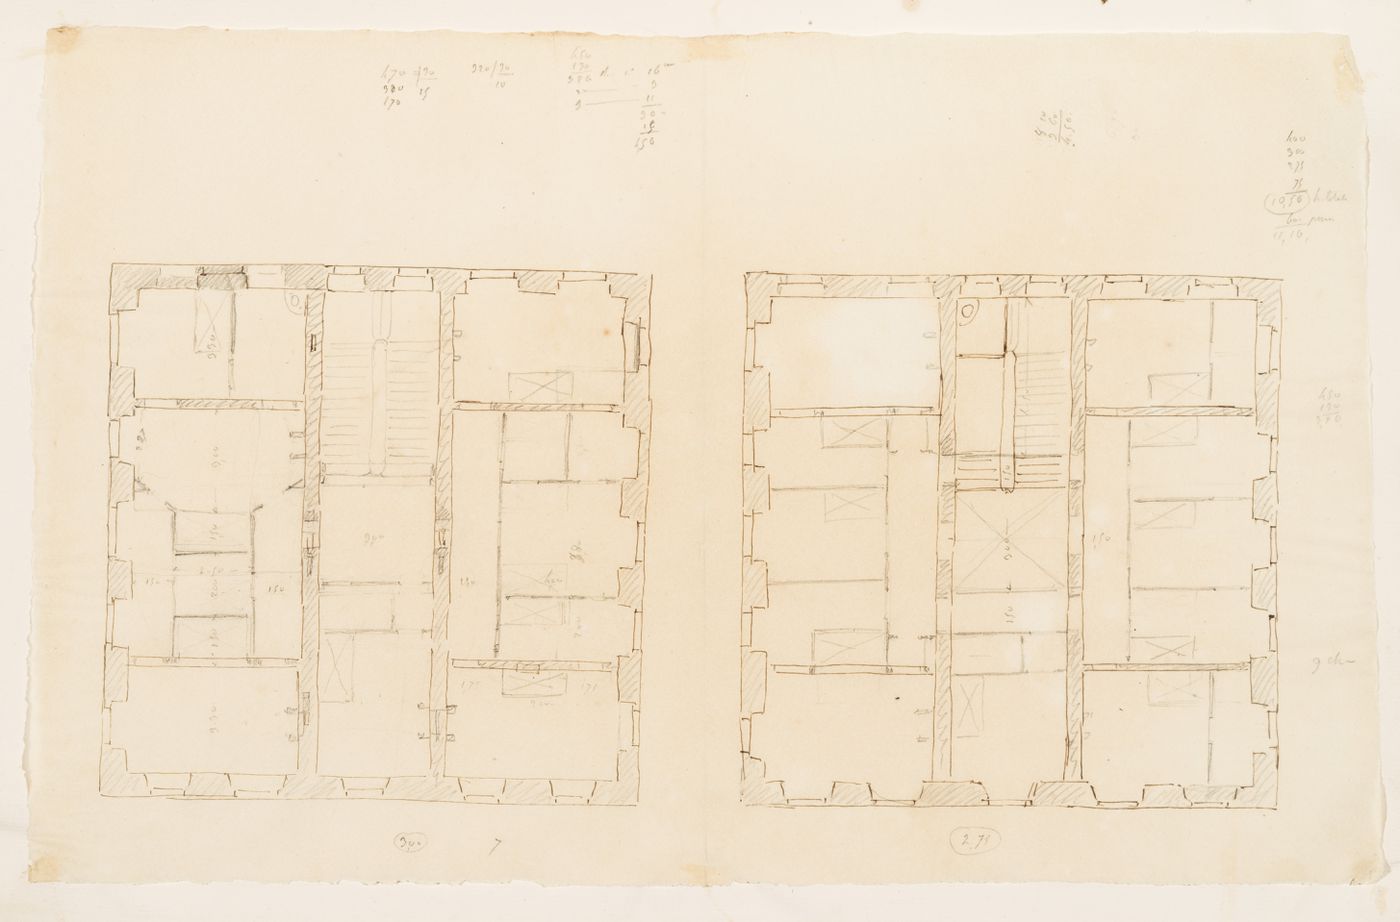 Project no. 10 for a country house for comte Treilhard: Plans